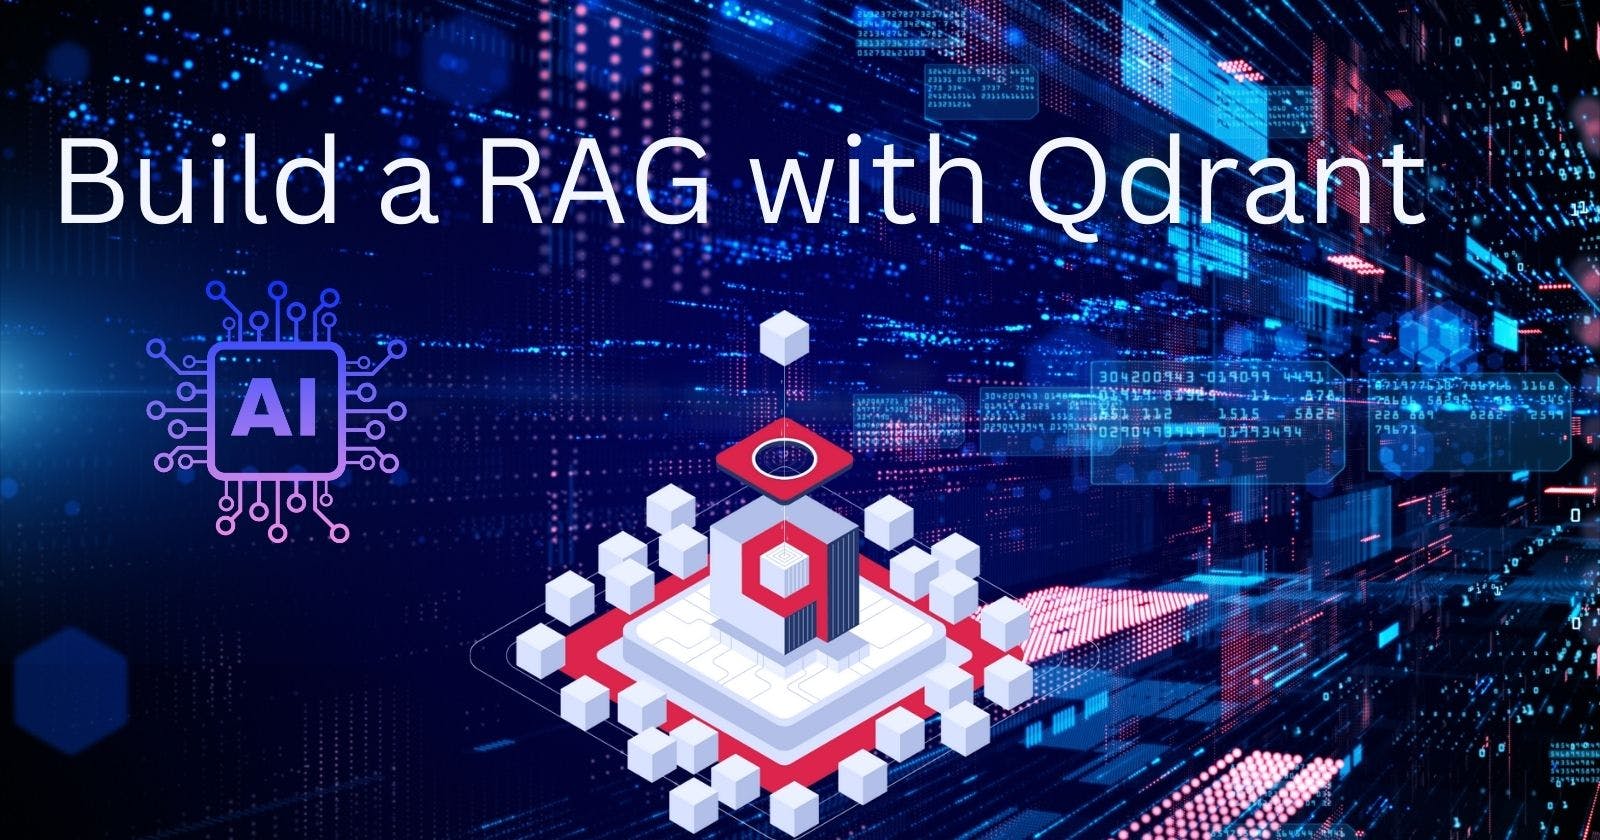 Build a production-grade RAG or similarity search using Qdrant and Langchain